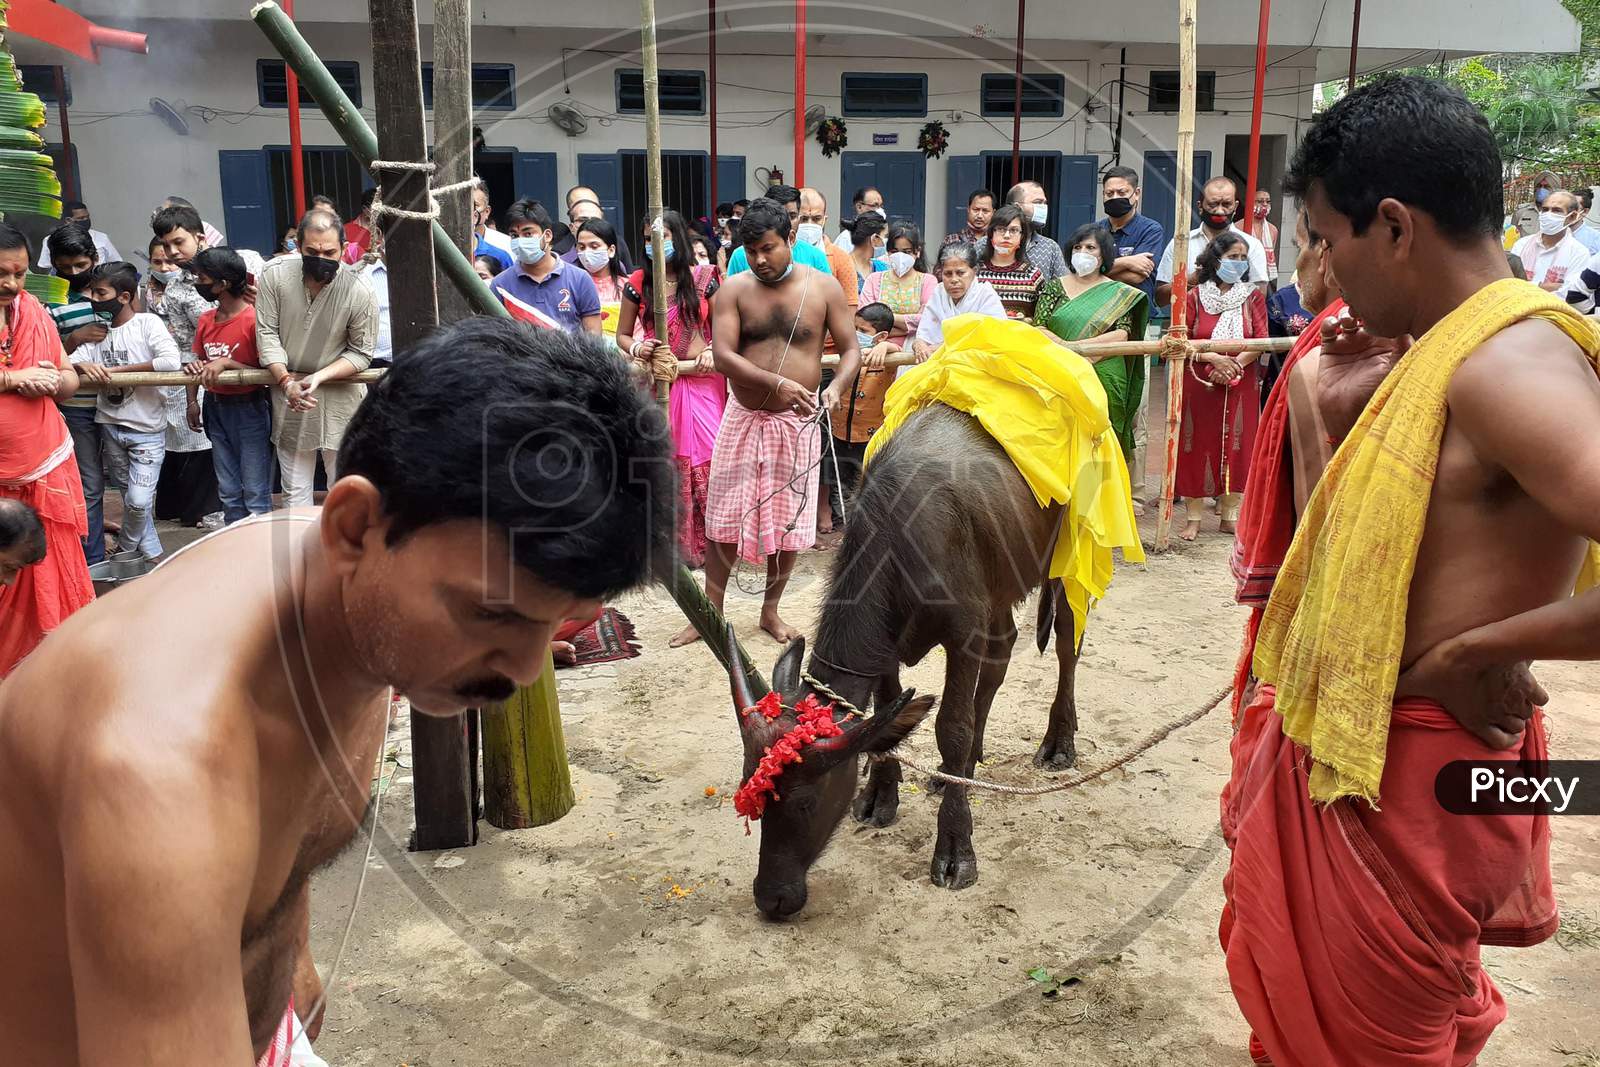 Hindu devotees prepare to sacrifice a buffalo as part of a ritual during the Durga Puja festival at a temple in Guwahati on oct 25,2020